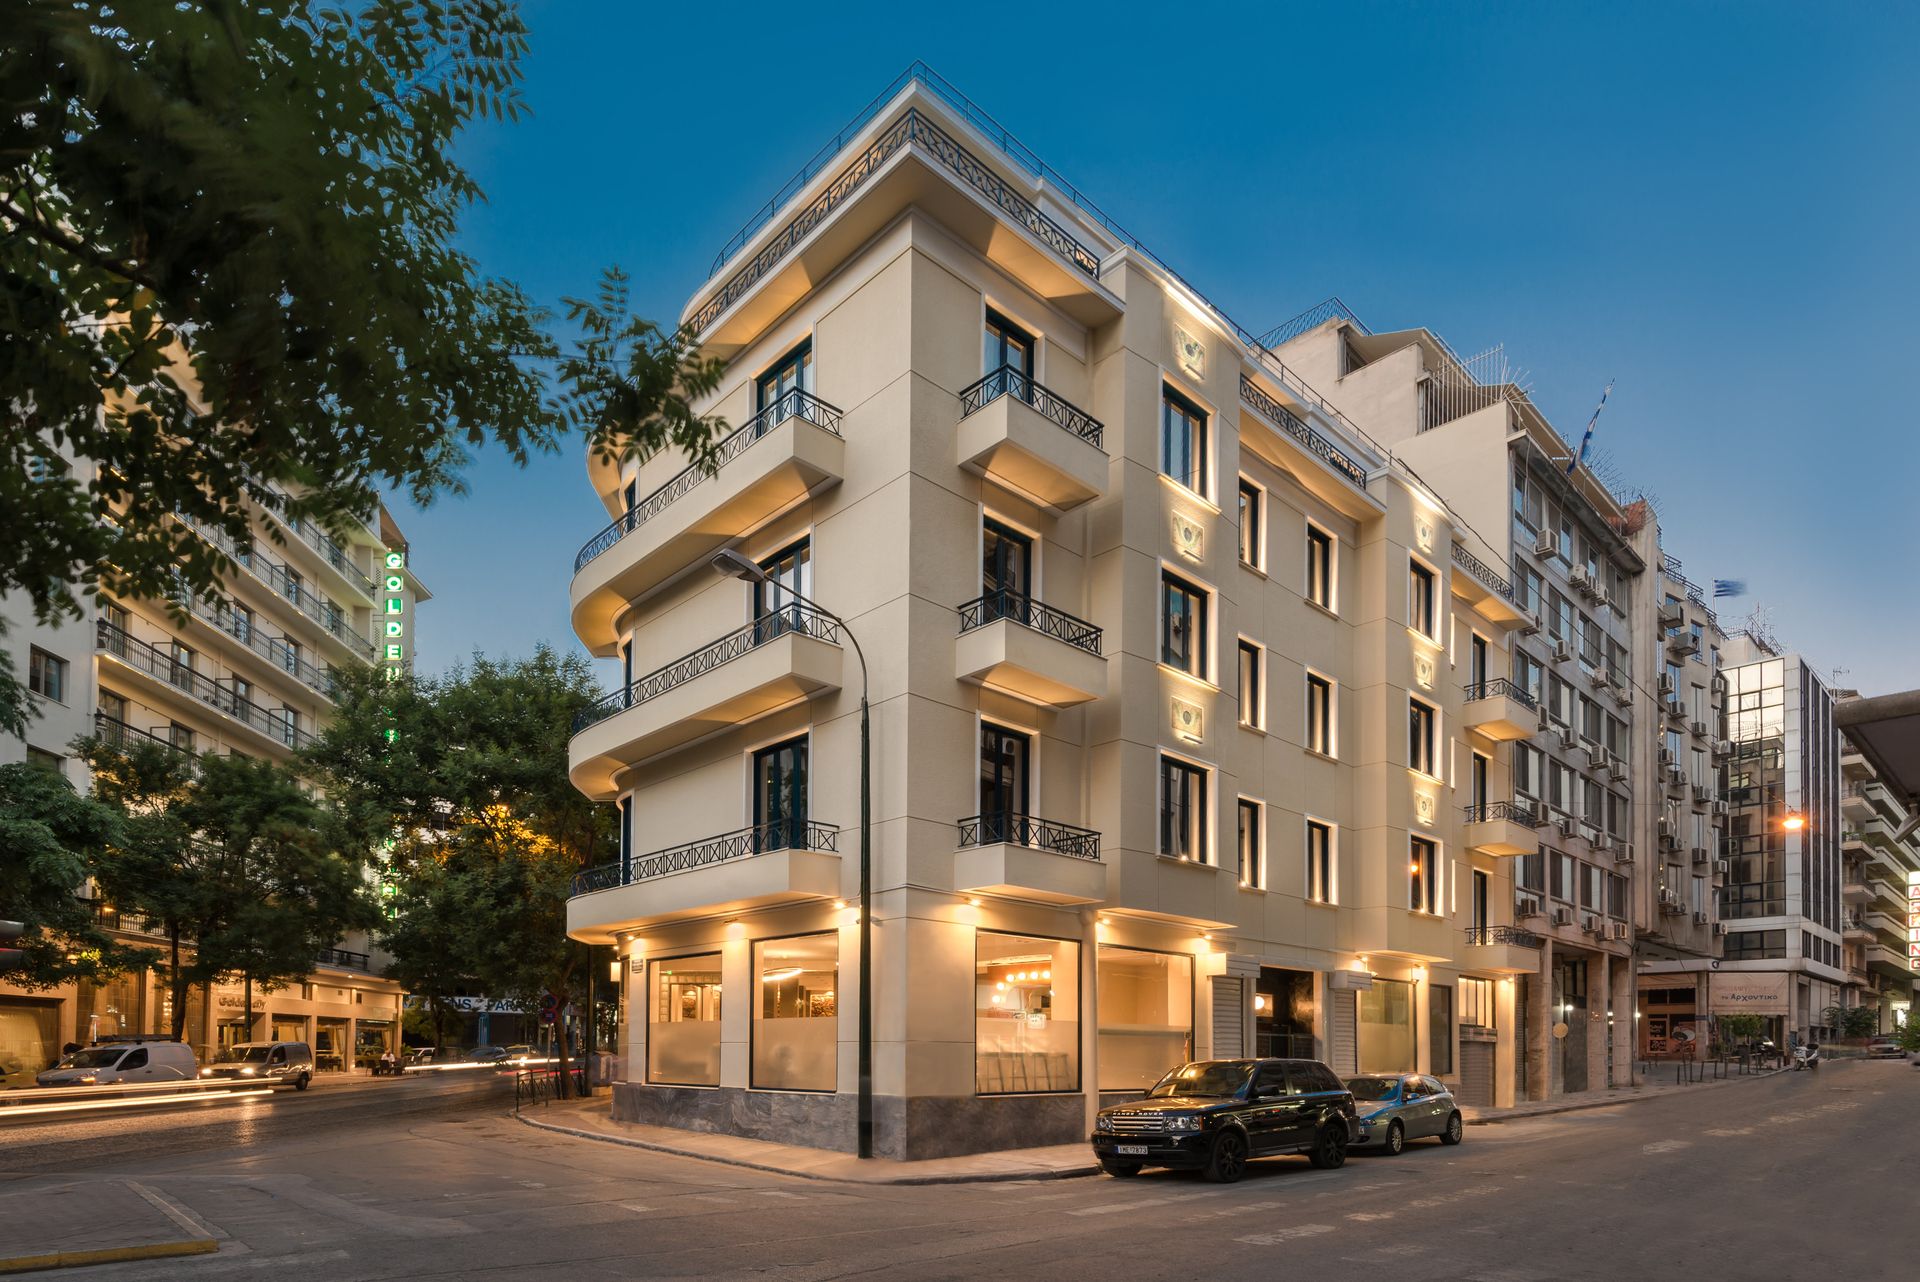 4* Athens One Smart Hotel - Αθήνα ✦ 2 Ημέρες (1 Διανυκτέρευση)